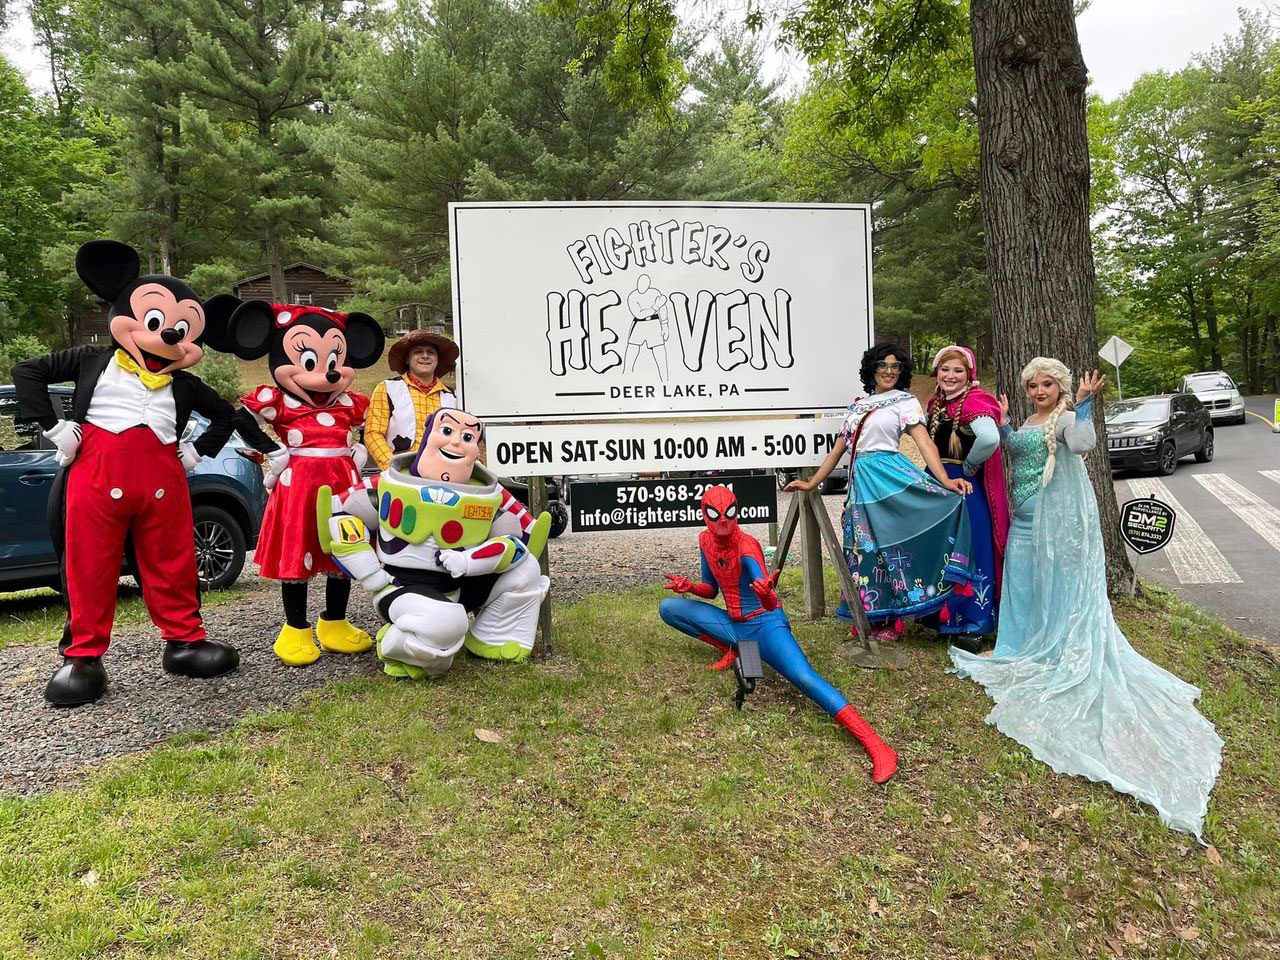 Disney Characters Raise Money for Local Charity